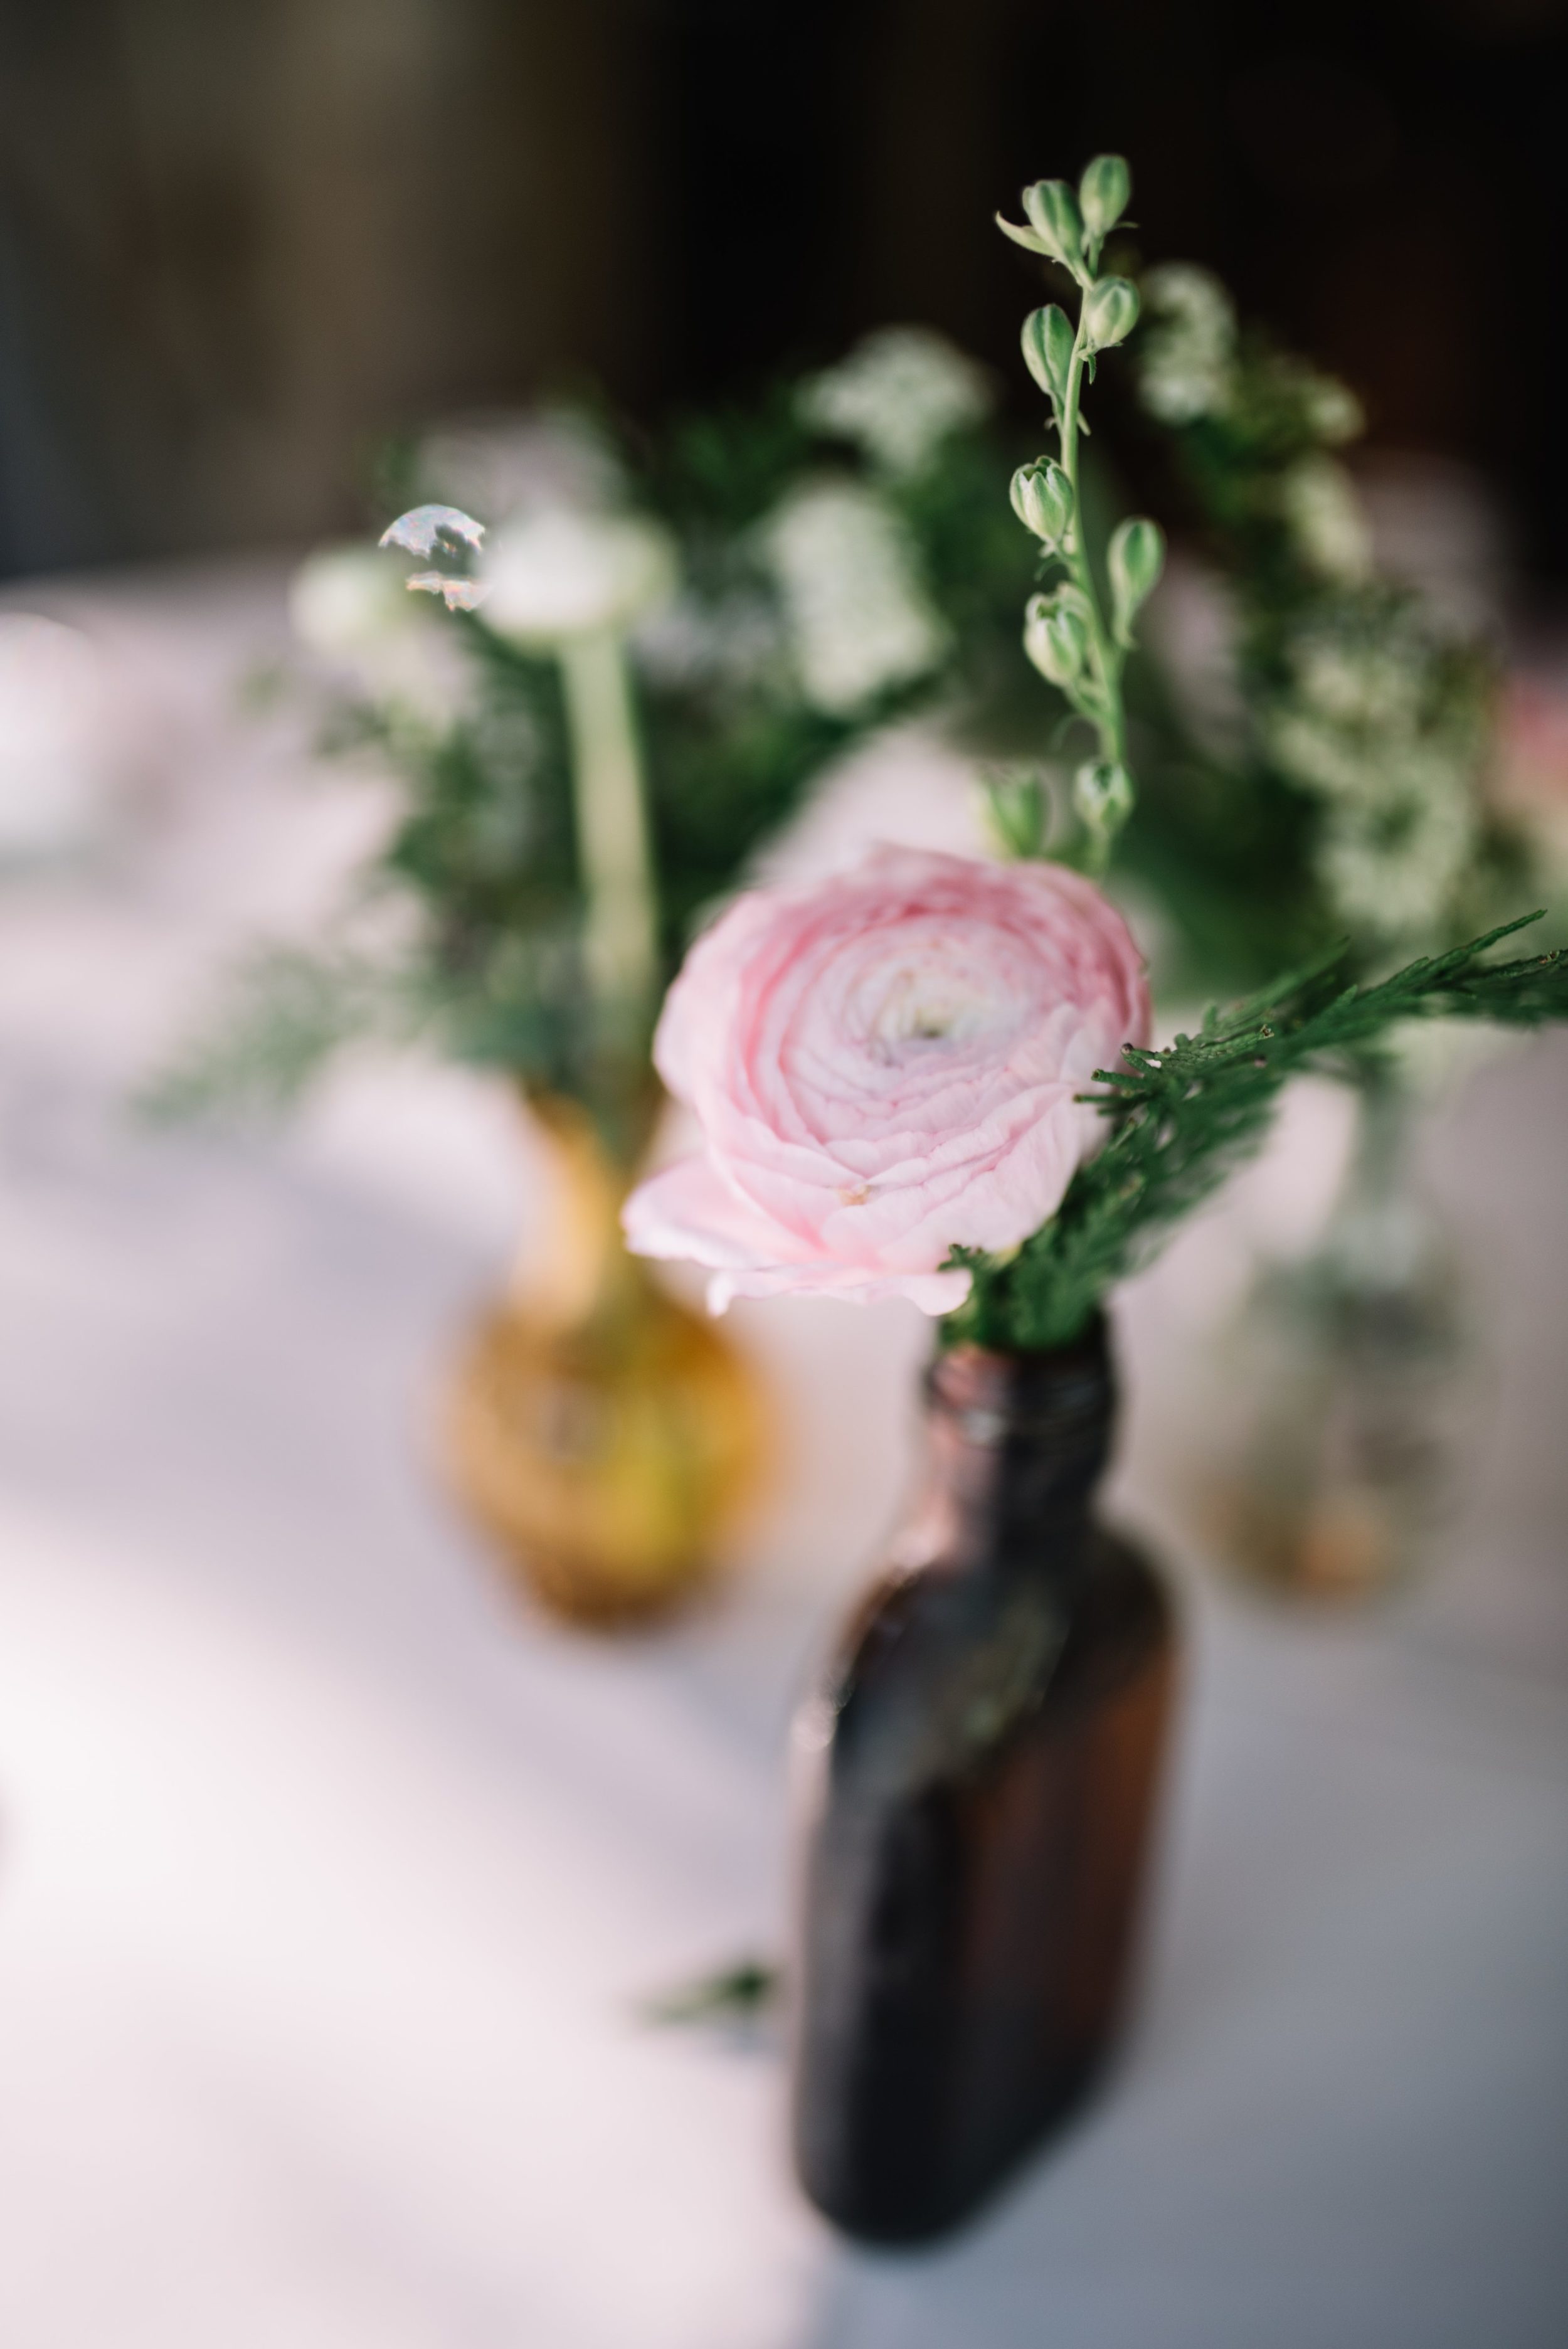 Amber bud vases with blush and white and greenery florals // Nashville Wedding Flowers